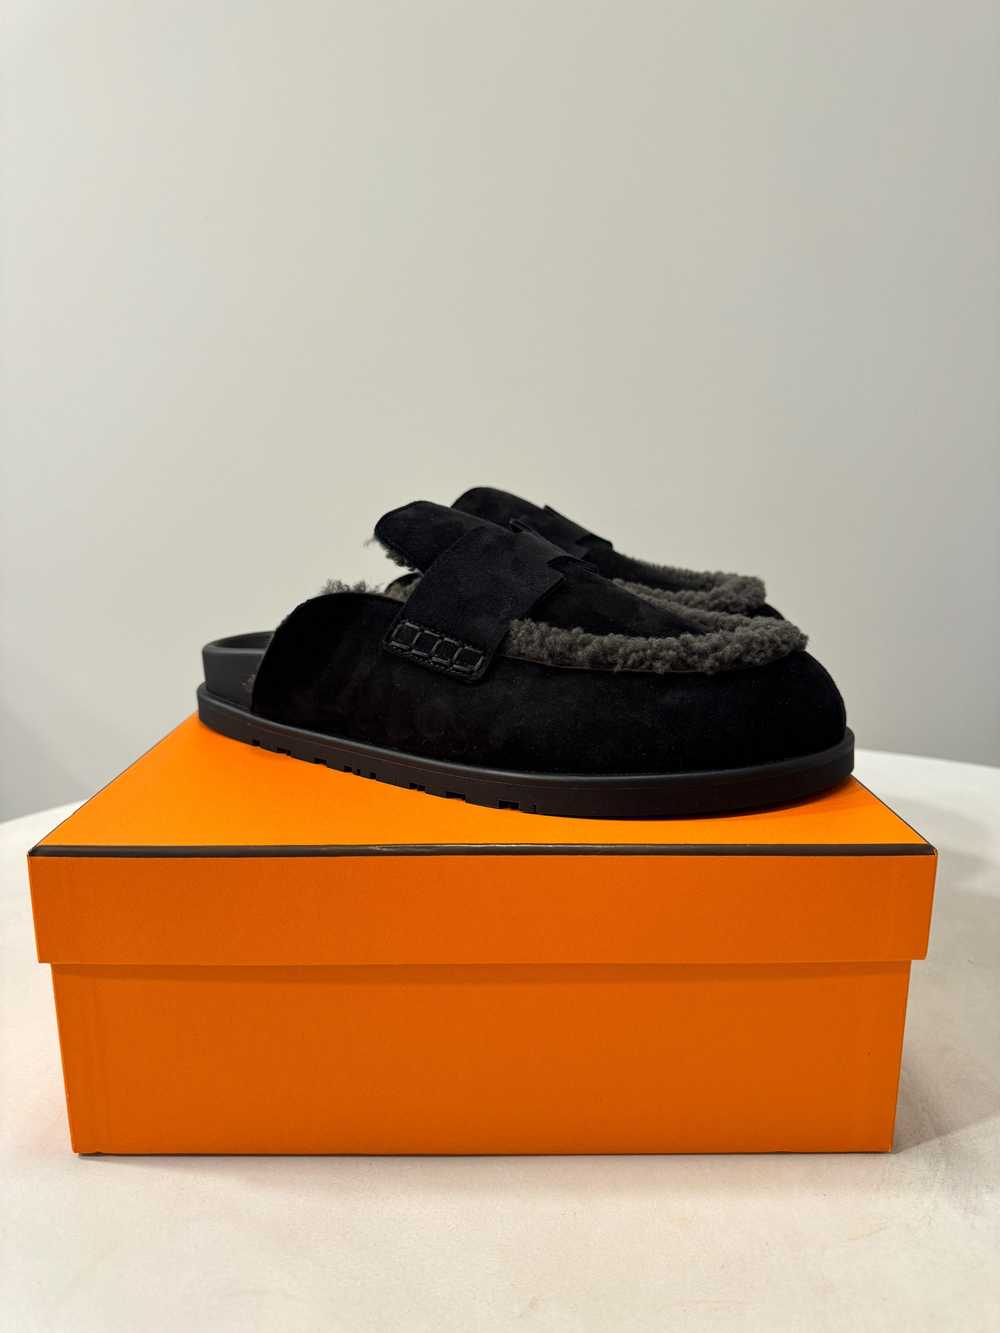 Hermes Hermes Black Suede and Shearling Go Mules - image 3